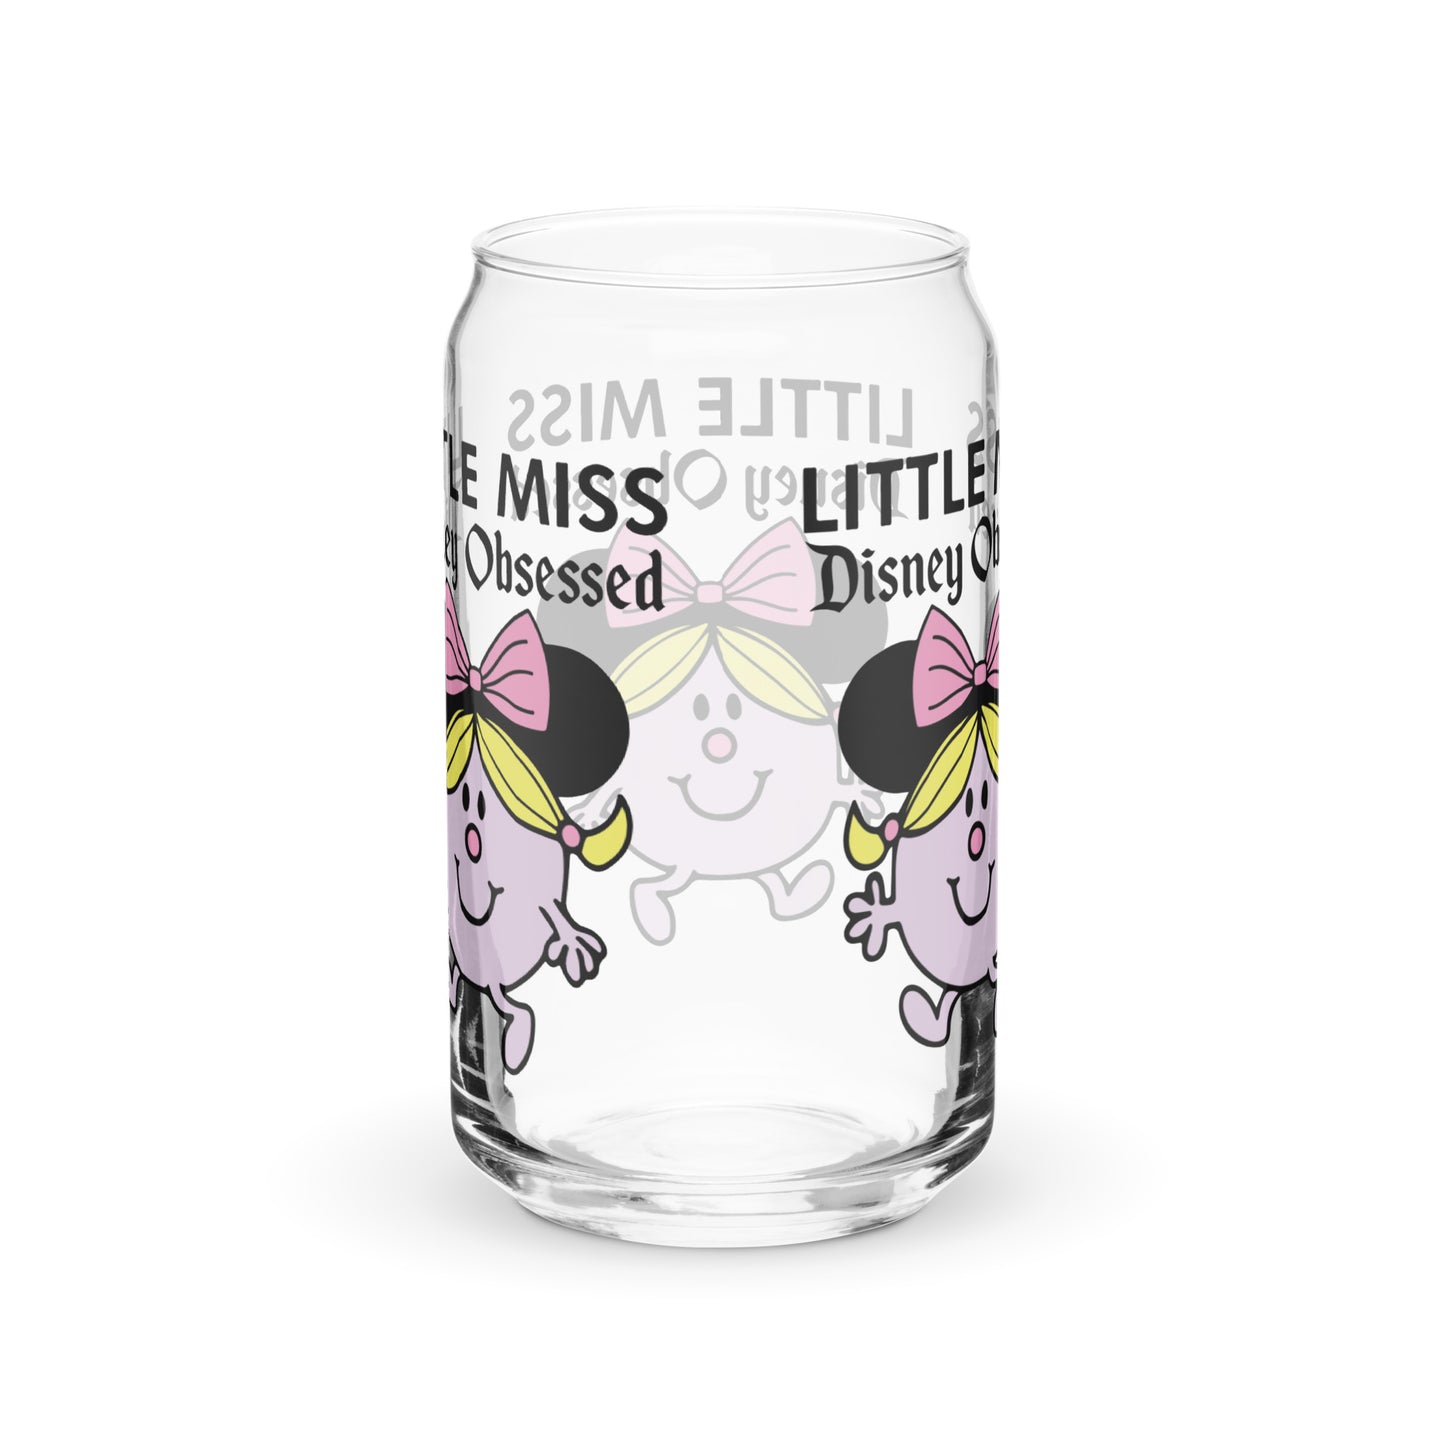 Little Miss Disney Obsessed Glass Can